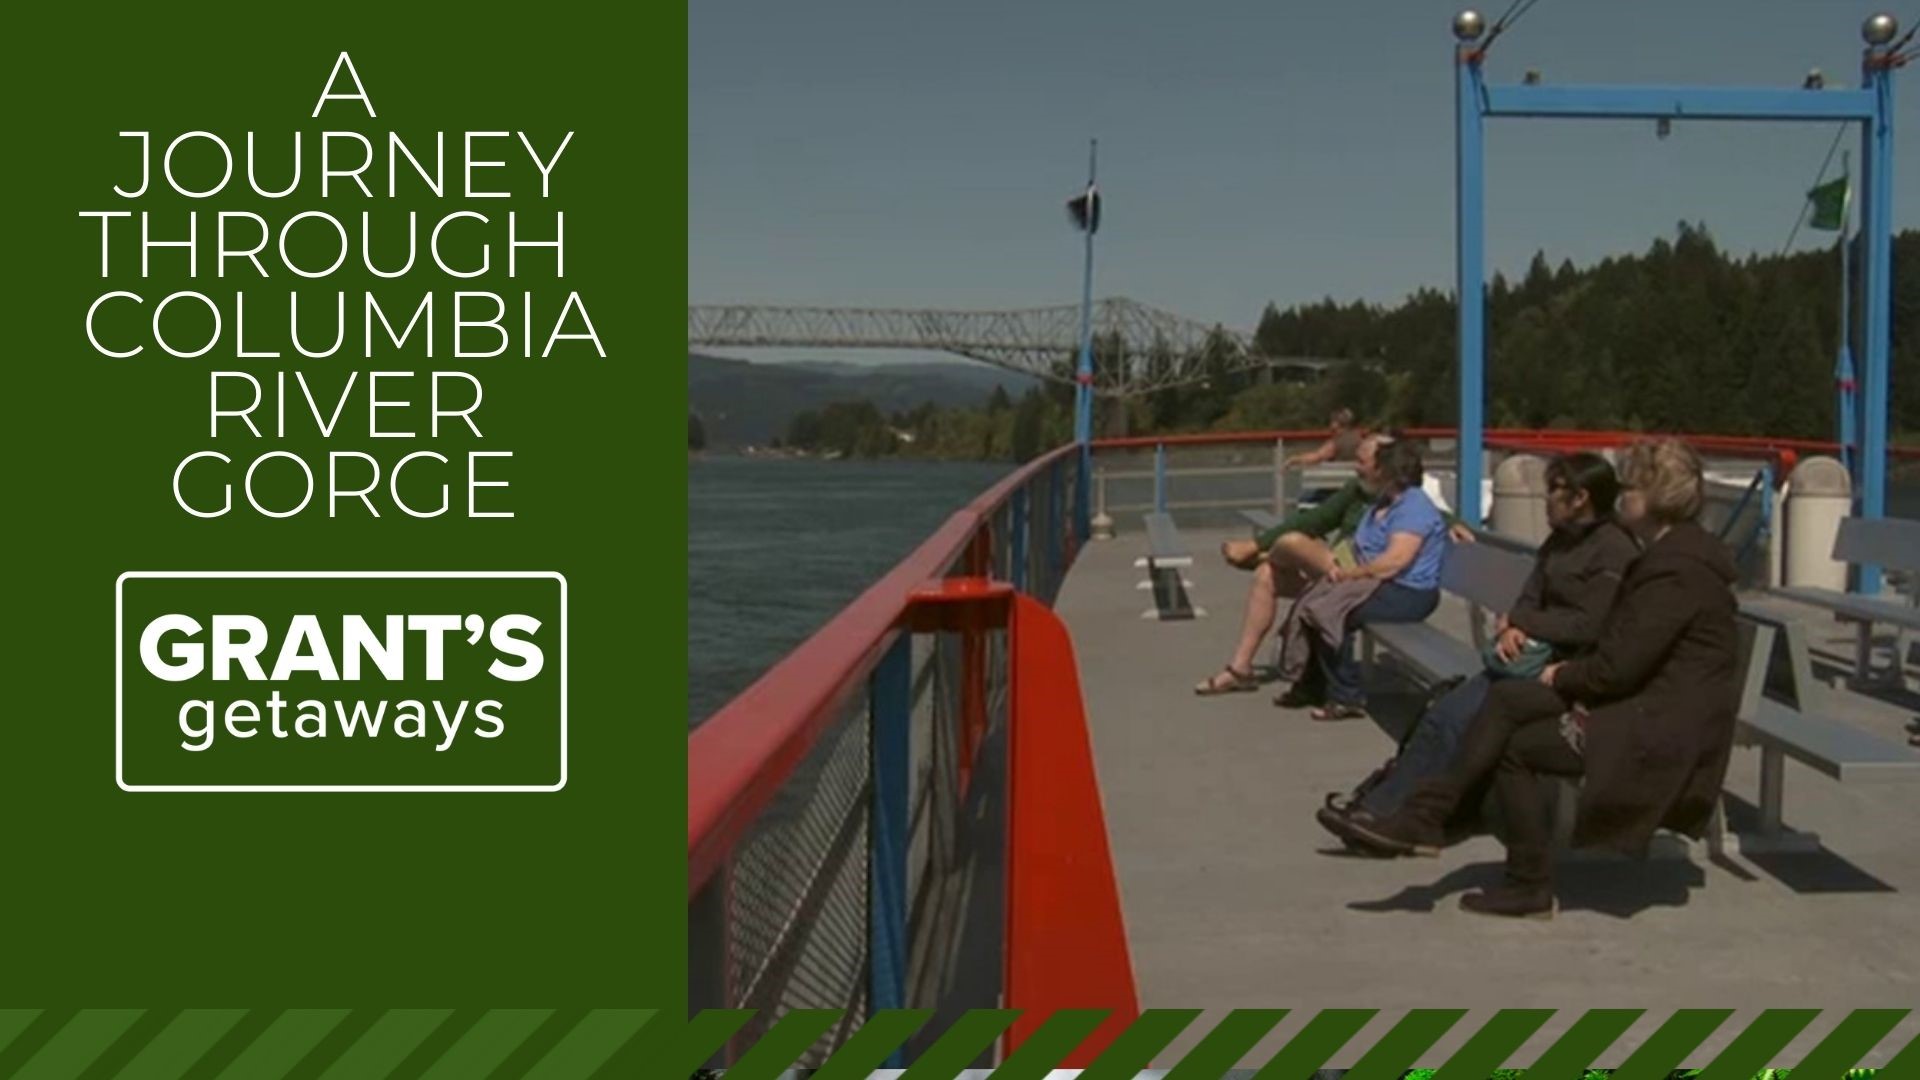 The Columbia River Gorge features ancient basalt cliffs that rise hundreds of feet above the river. Grant McOmie explores the waters from the Sternwheeler.